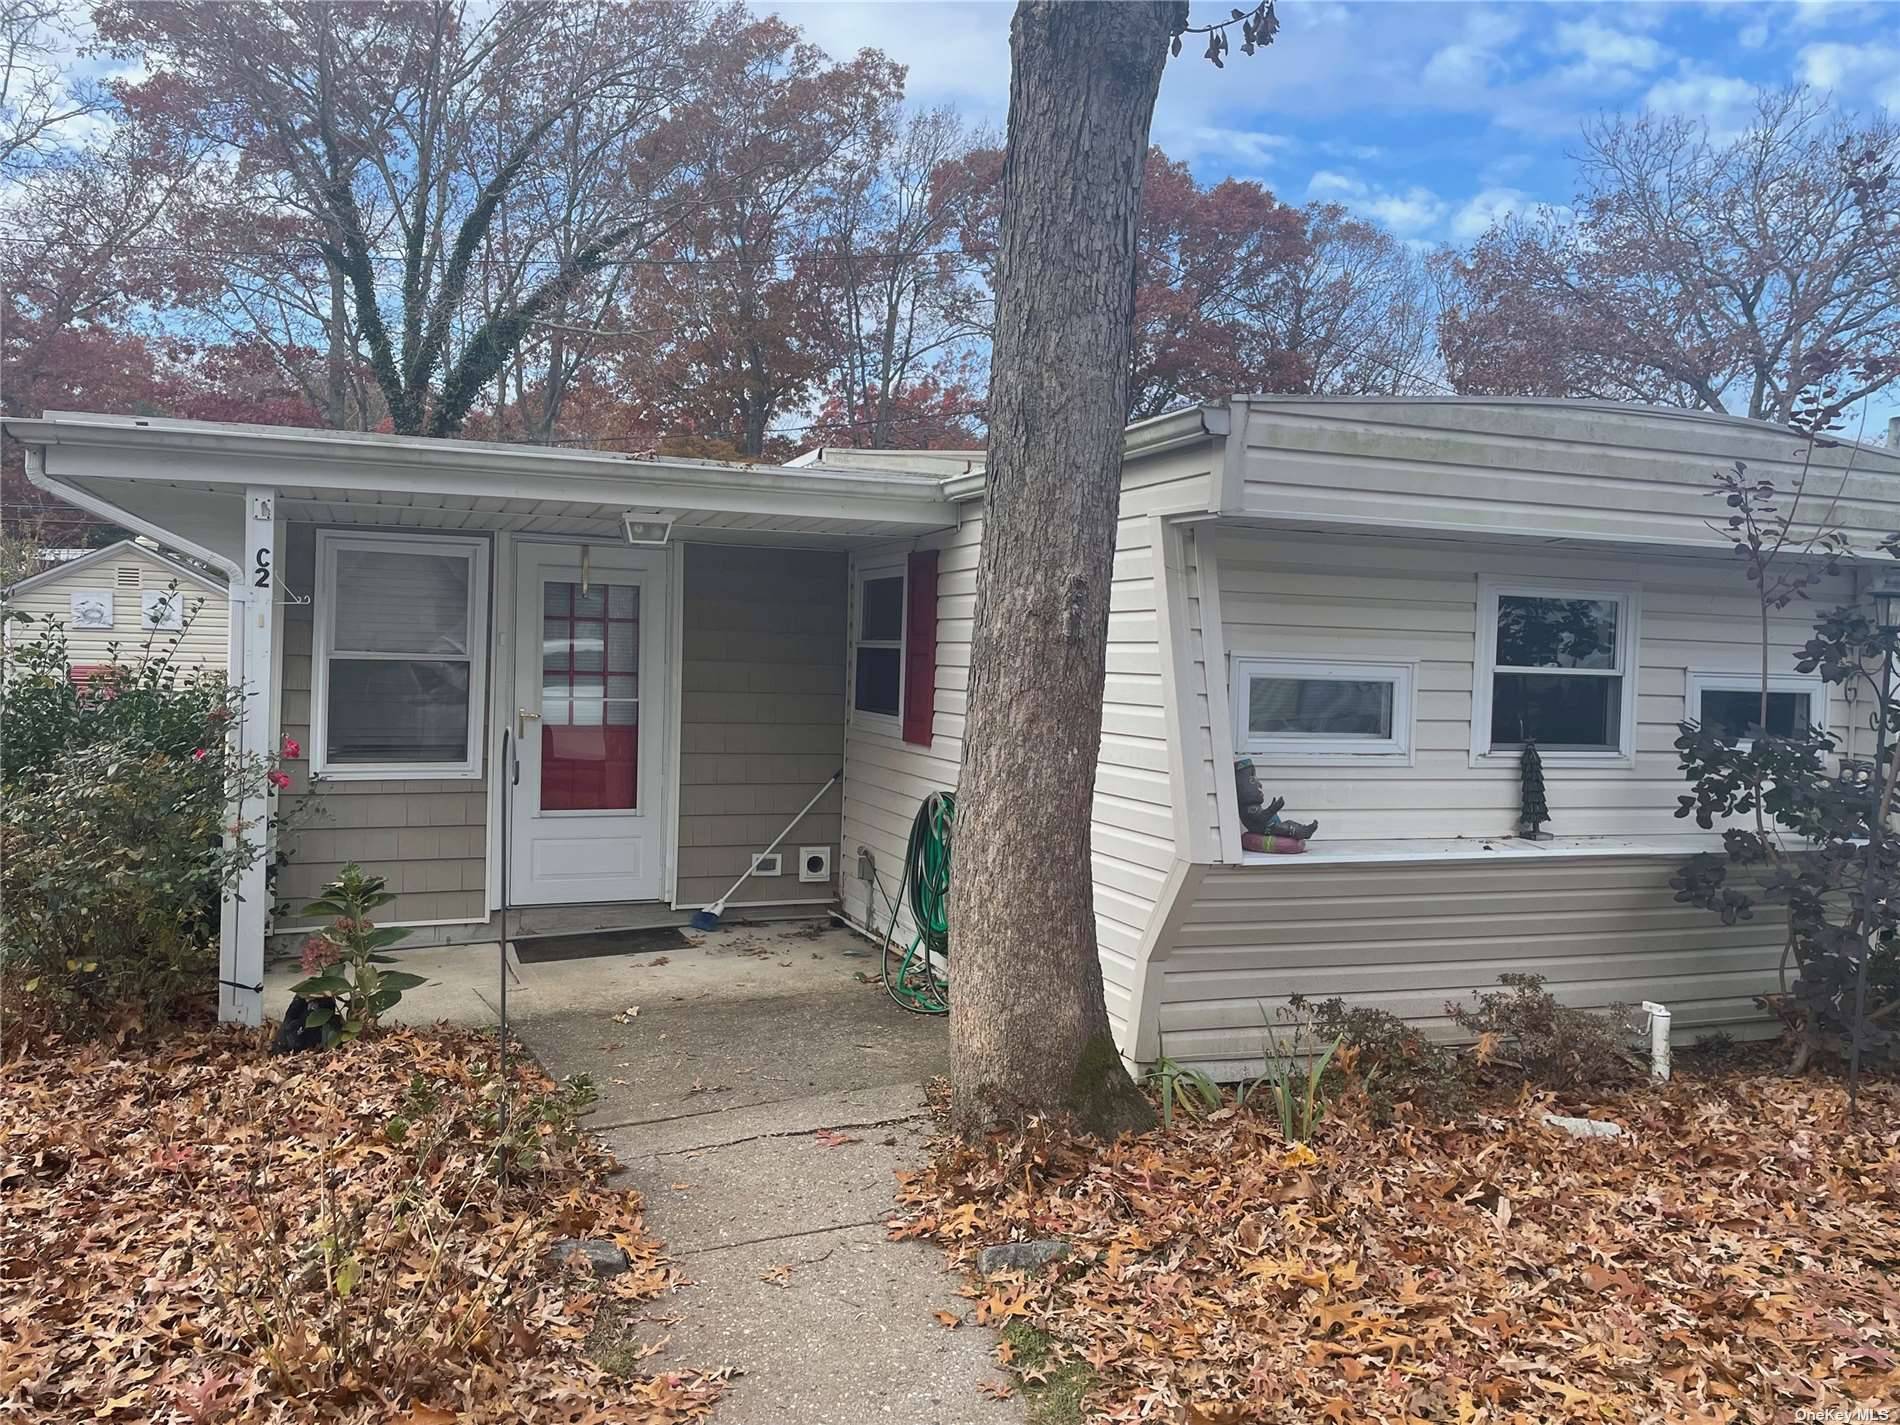 55 and over. Gateway to the North Fork, affordable living at its finest this extra special mobile home is in fantastic condition, it has an additional entry sun porch, all ...